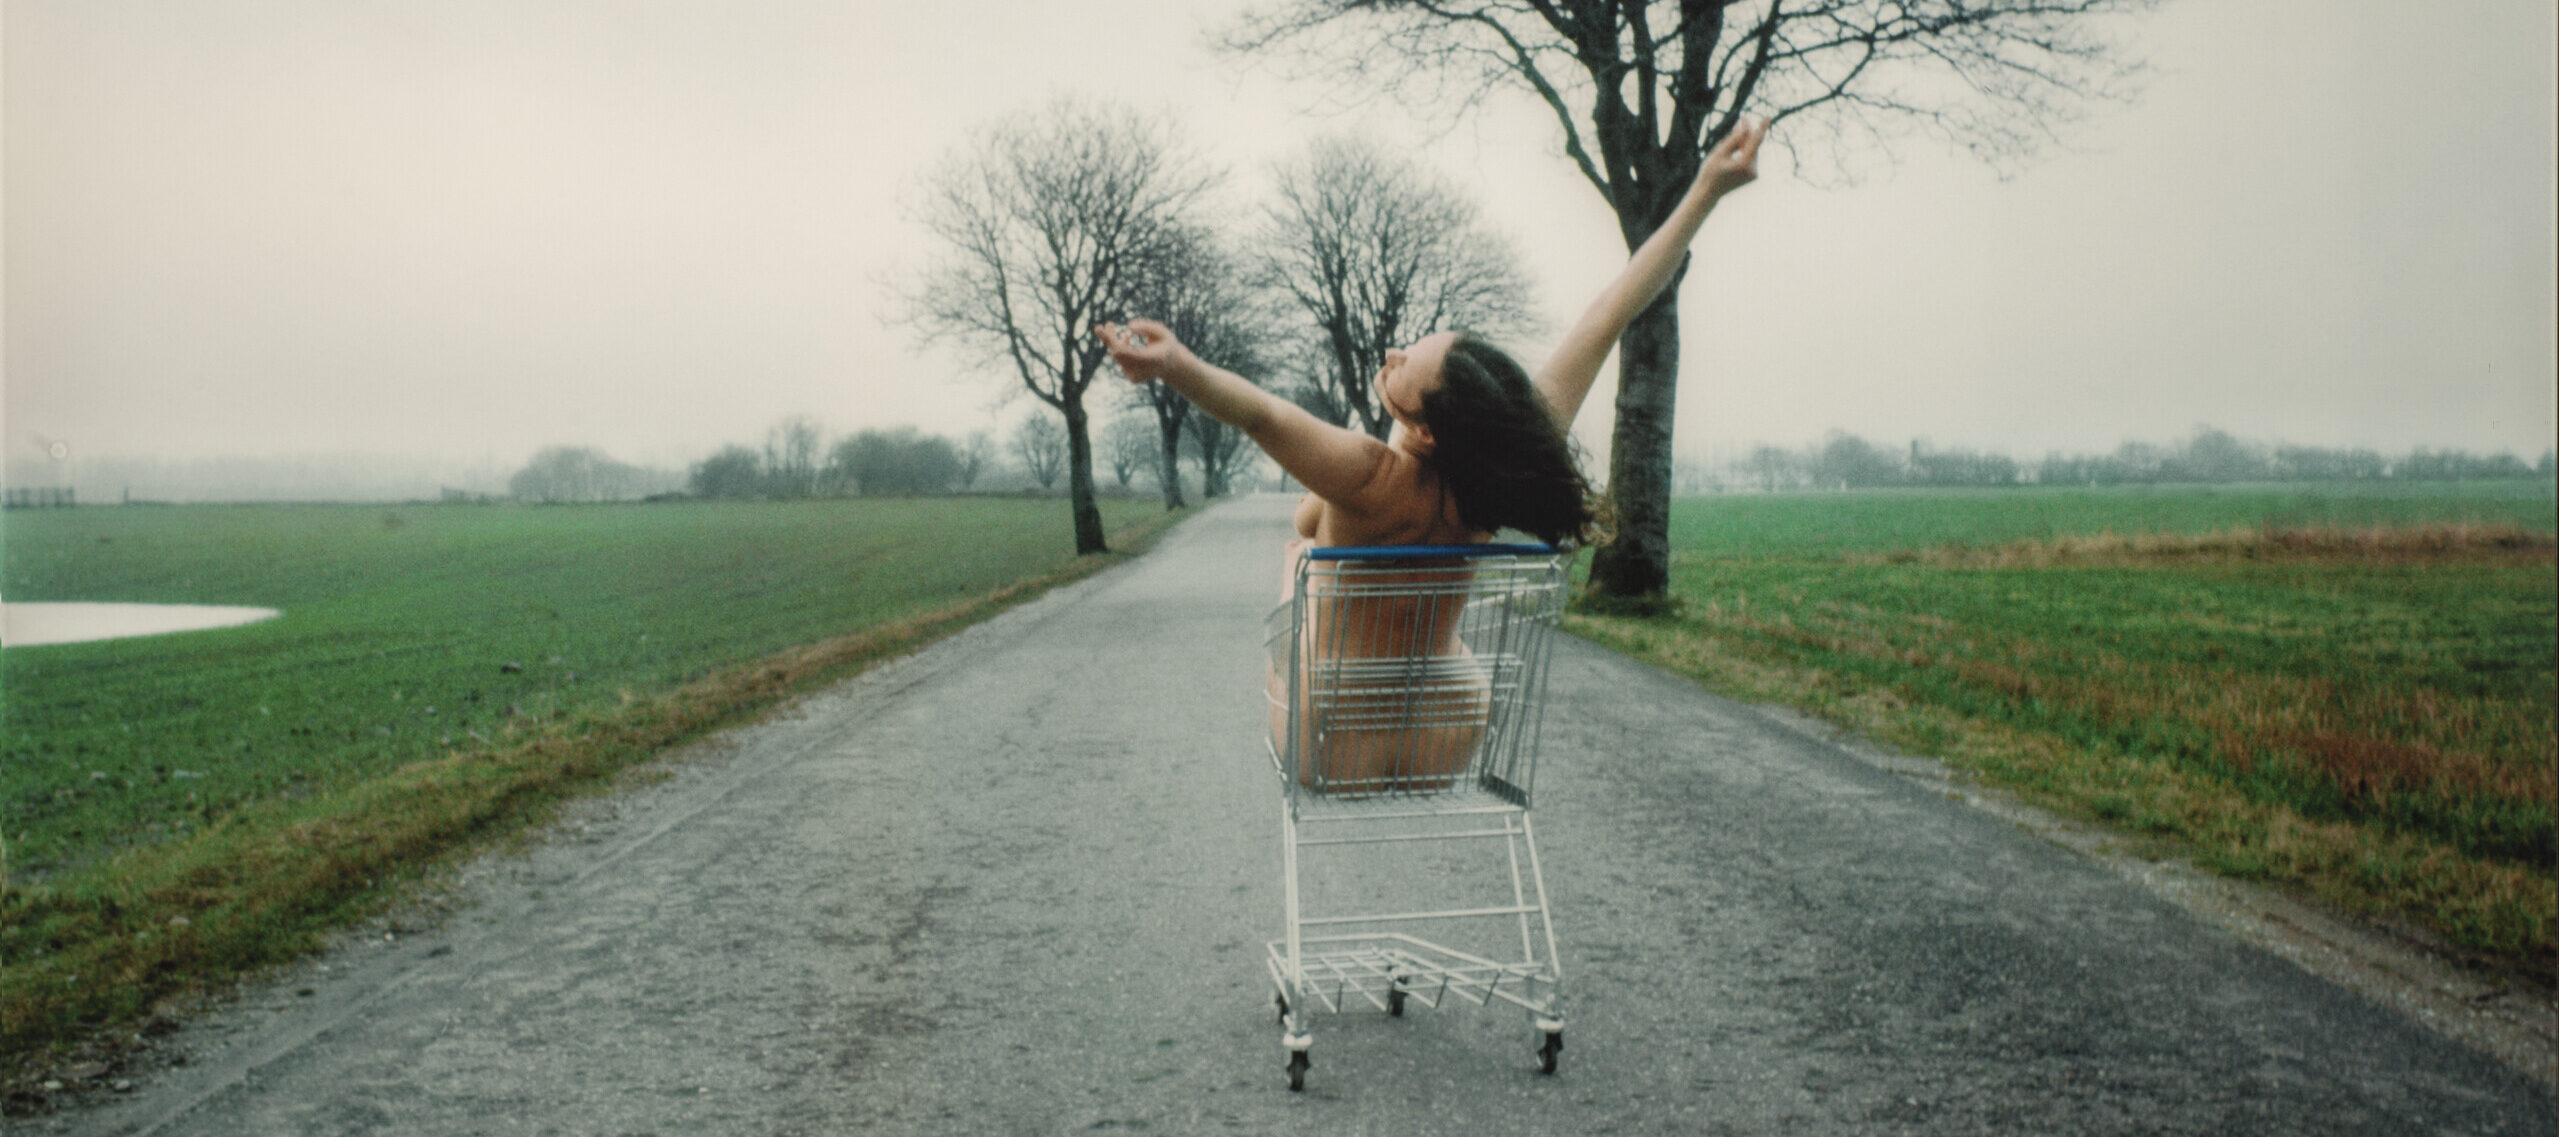 A photograph shows the nude artist sitting in a metal grocery cart. It is located on a paved road in a flat, empty landscape under a gray, misty sky. Her back to the viewer, the light-skinned, brunette woman holds her raised arms in a wide V-shape, suggesting joy or abandon.